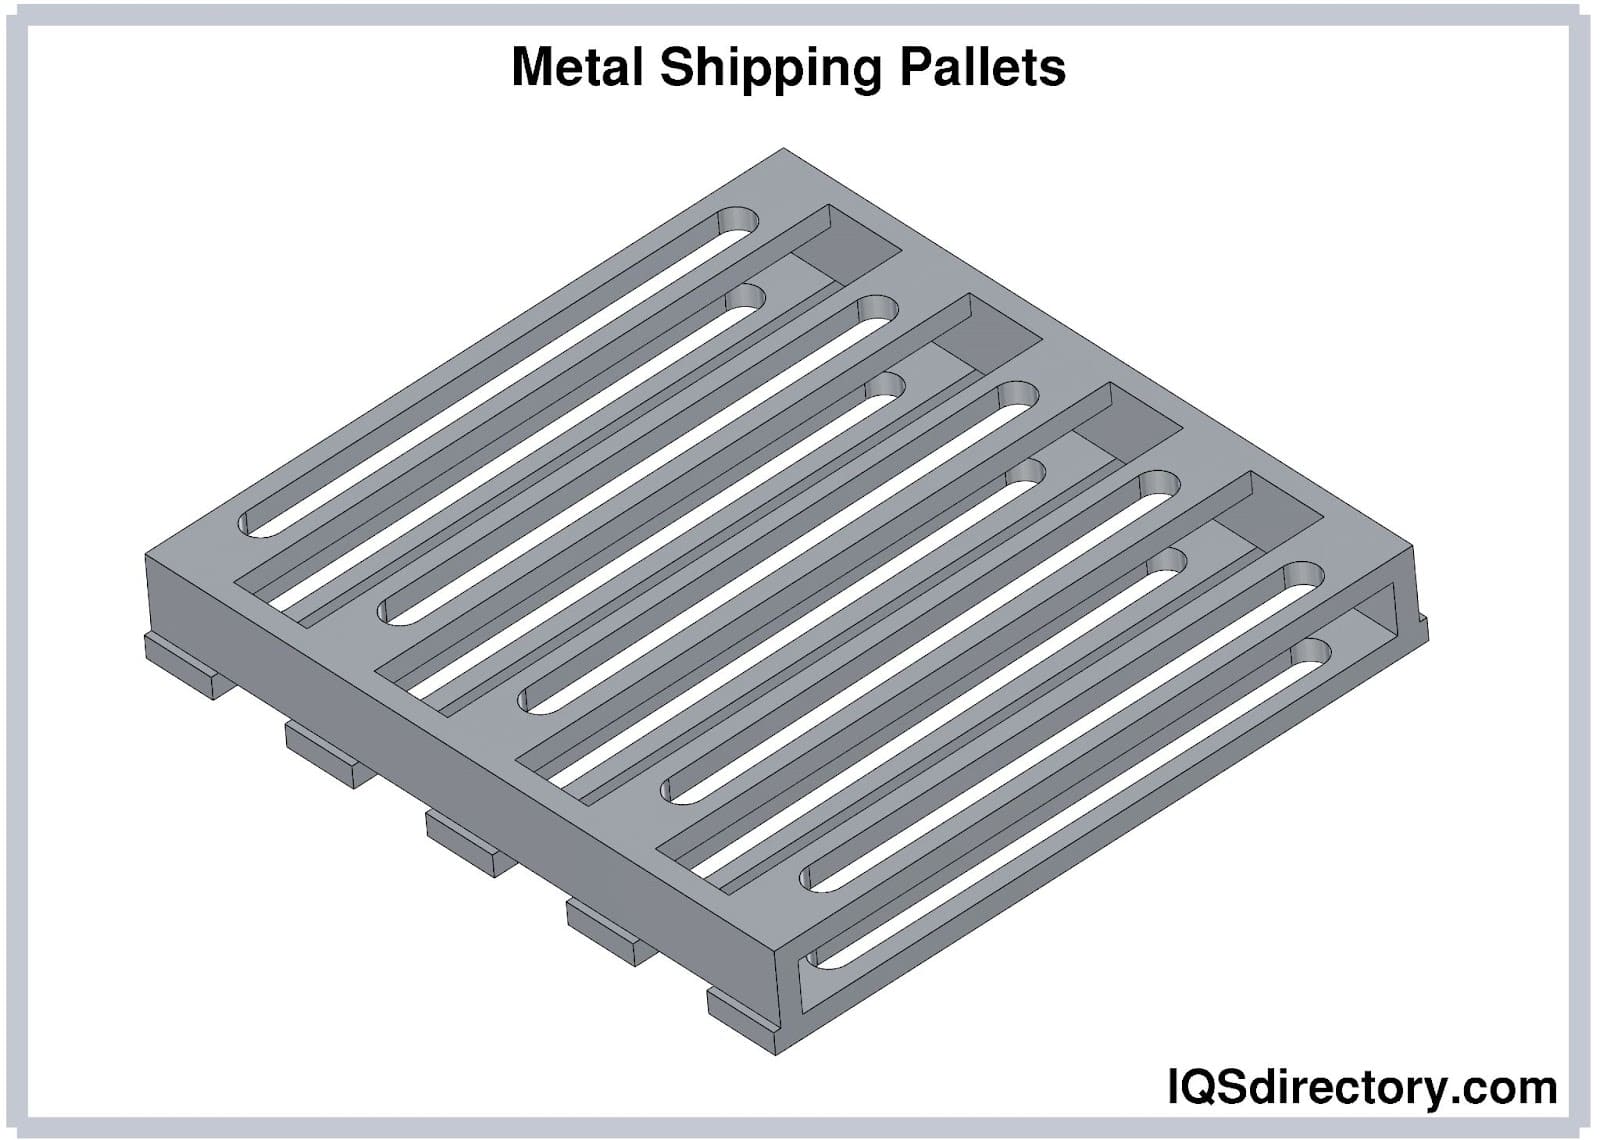 Metal Shipping Pallets